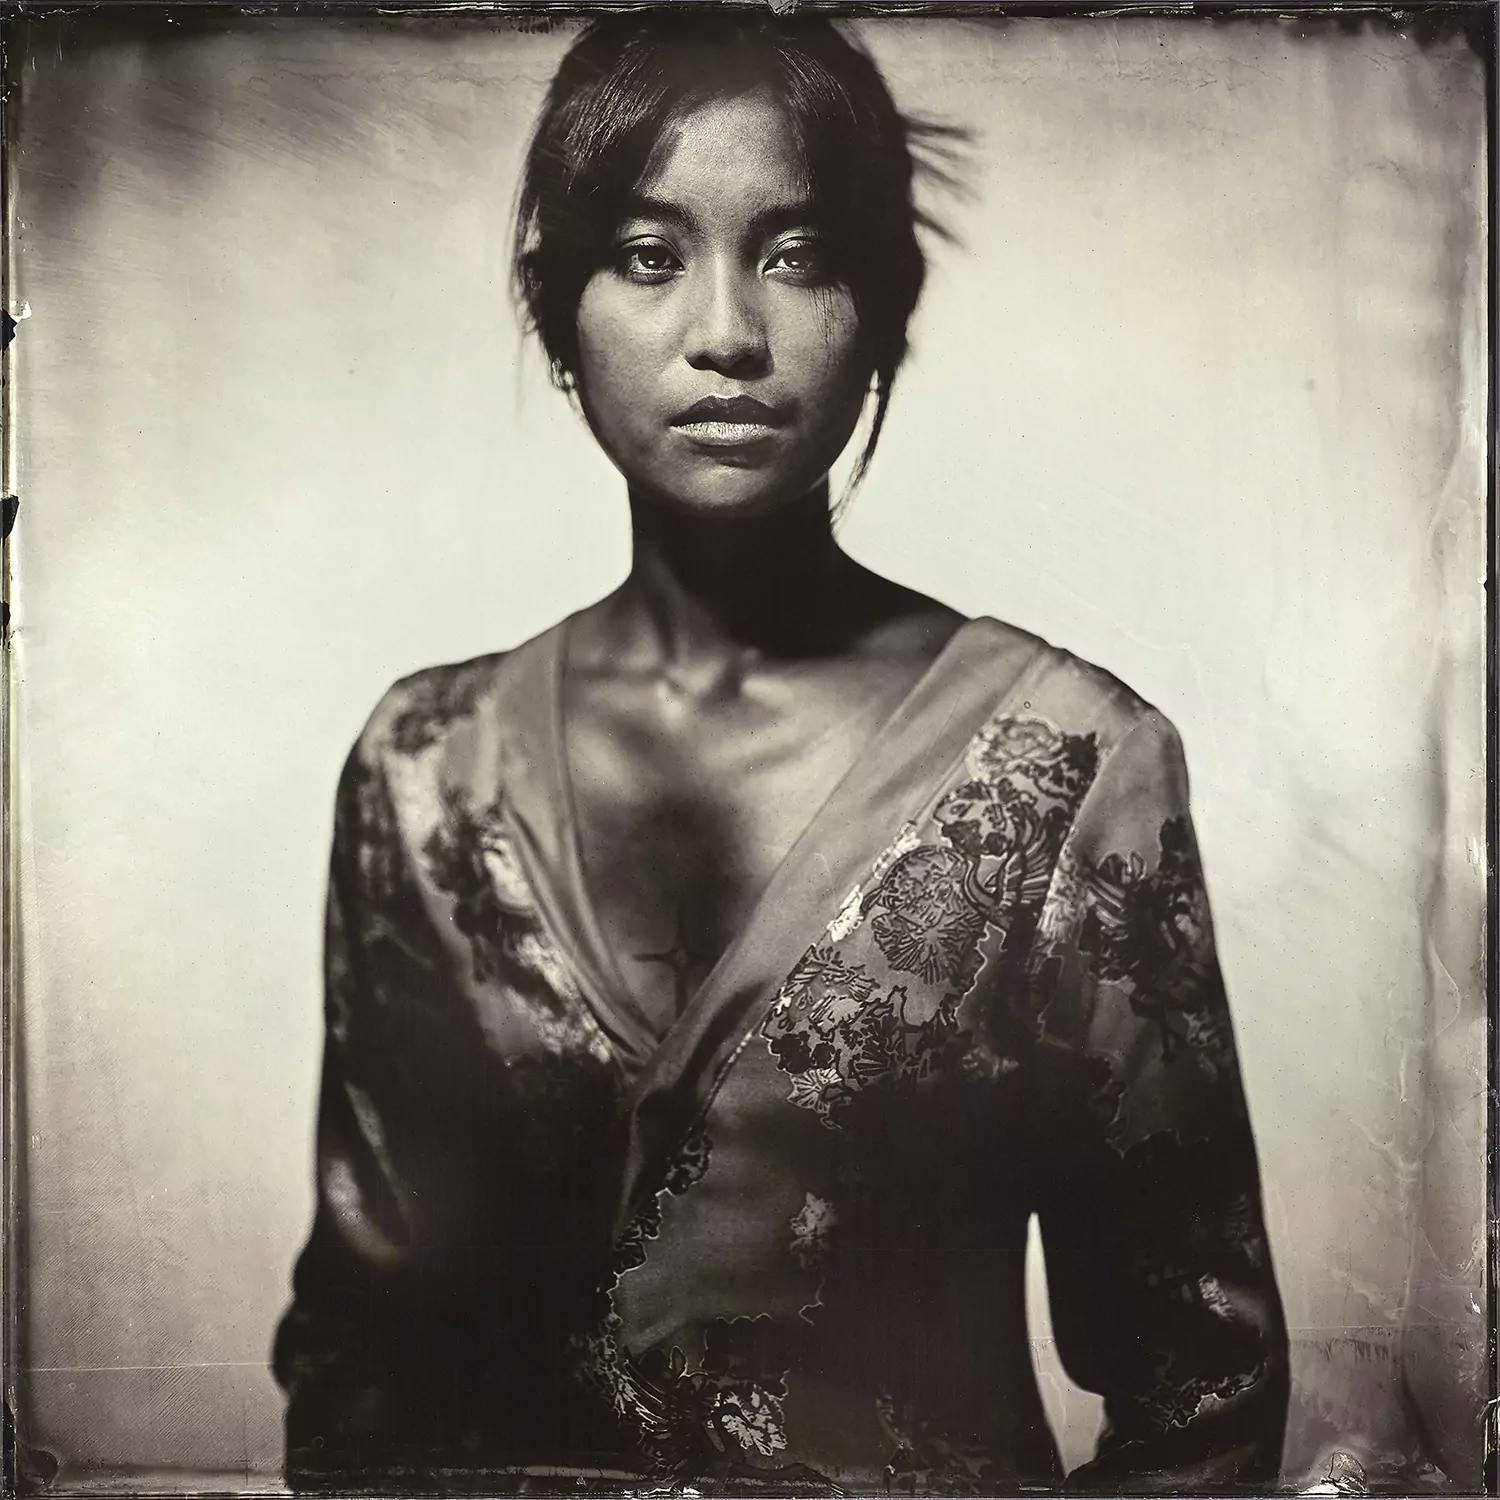 Collodion process portrait result after processing wet plate